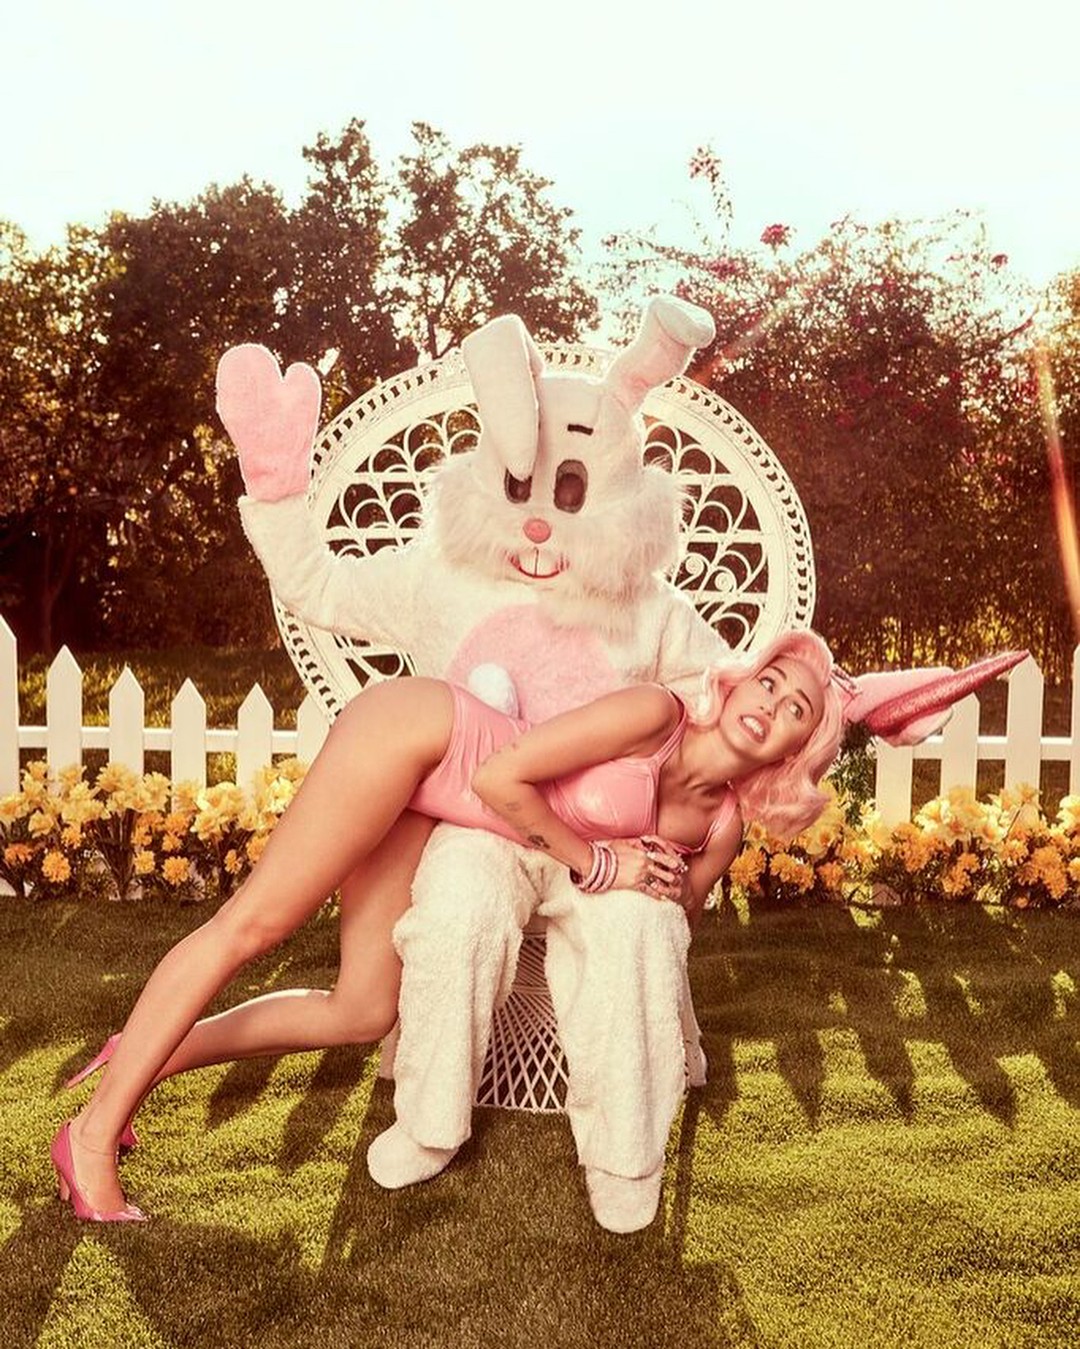 Miley Cyrus Celebrates Easter With Photos Of A Bunny Spanking Her.